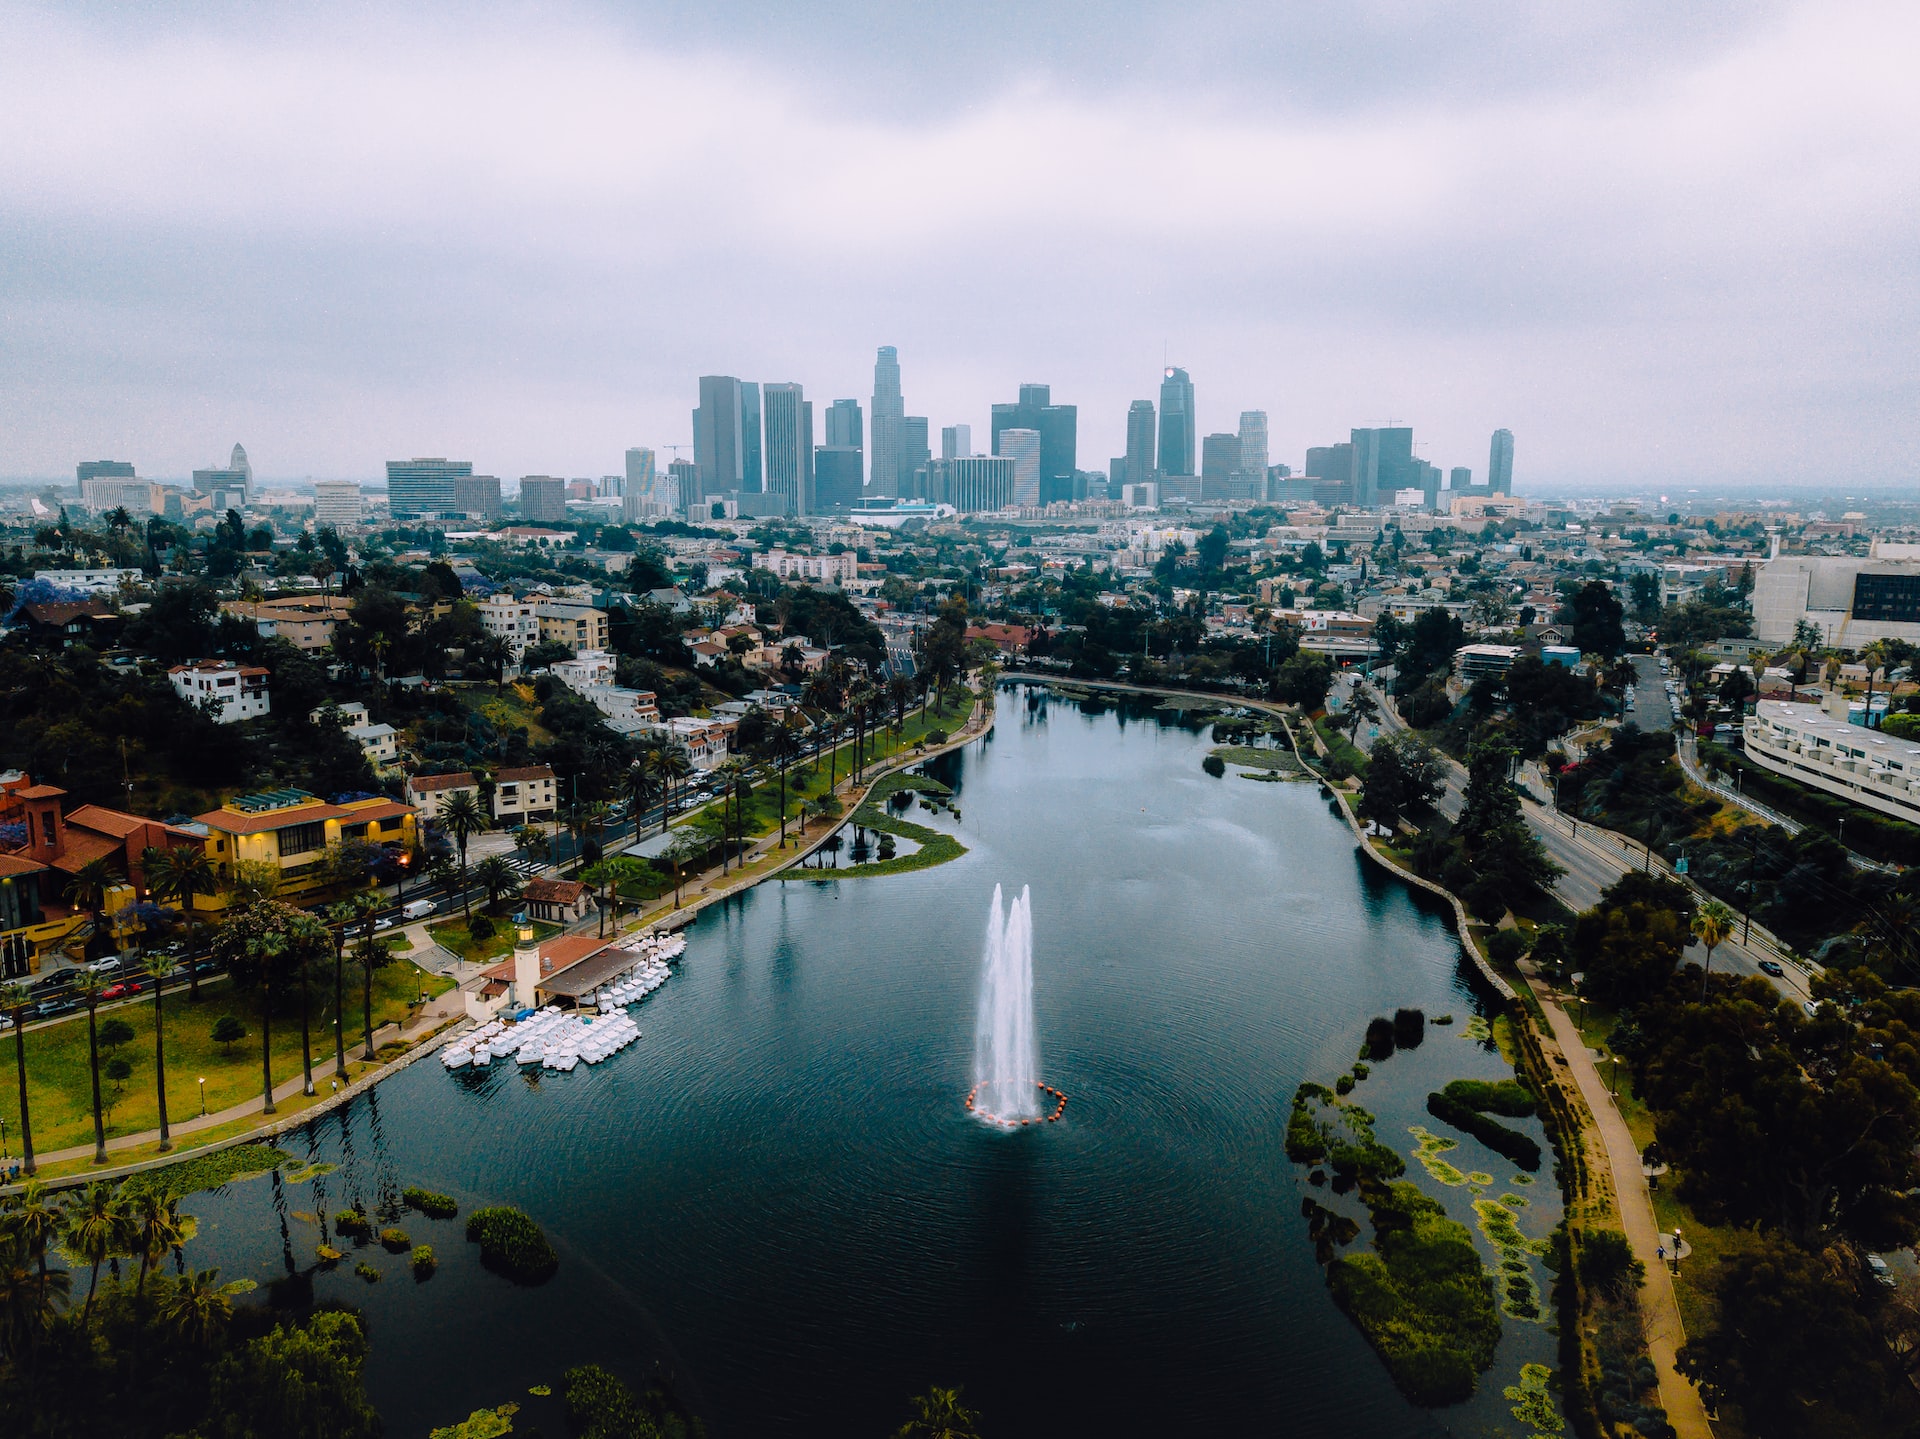 Downtown LA as seen from the Echo Park and Silver Lake area.